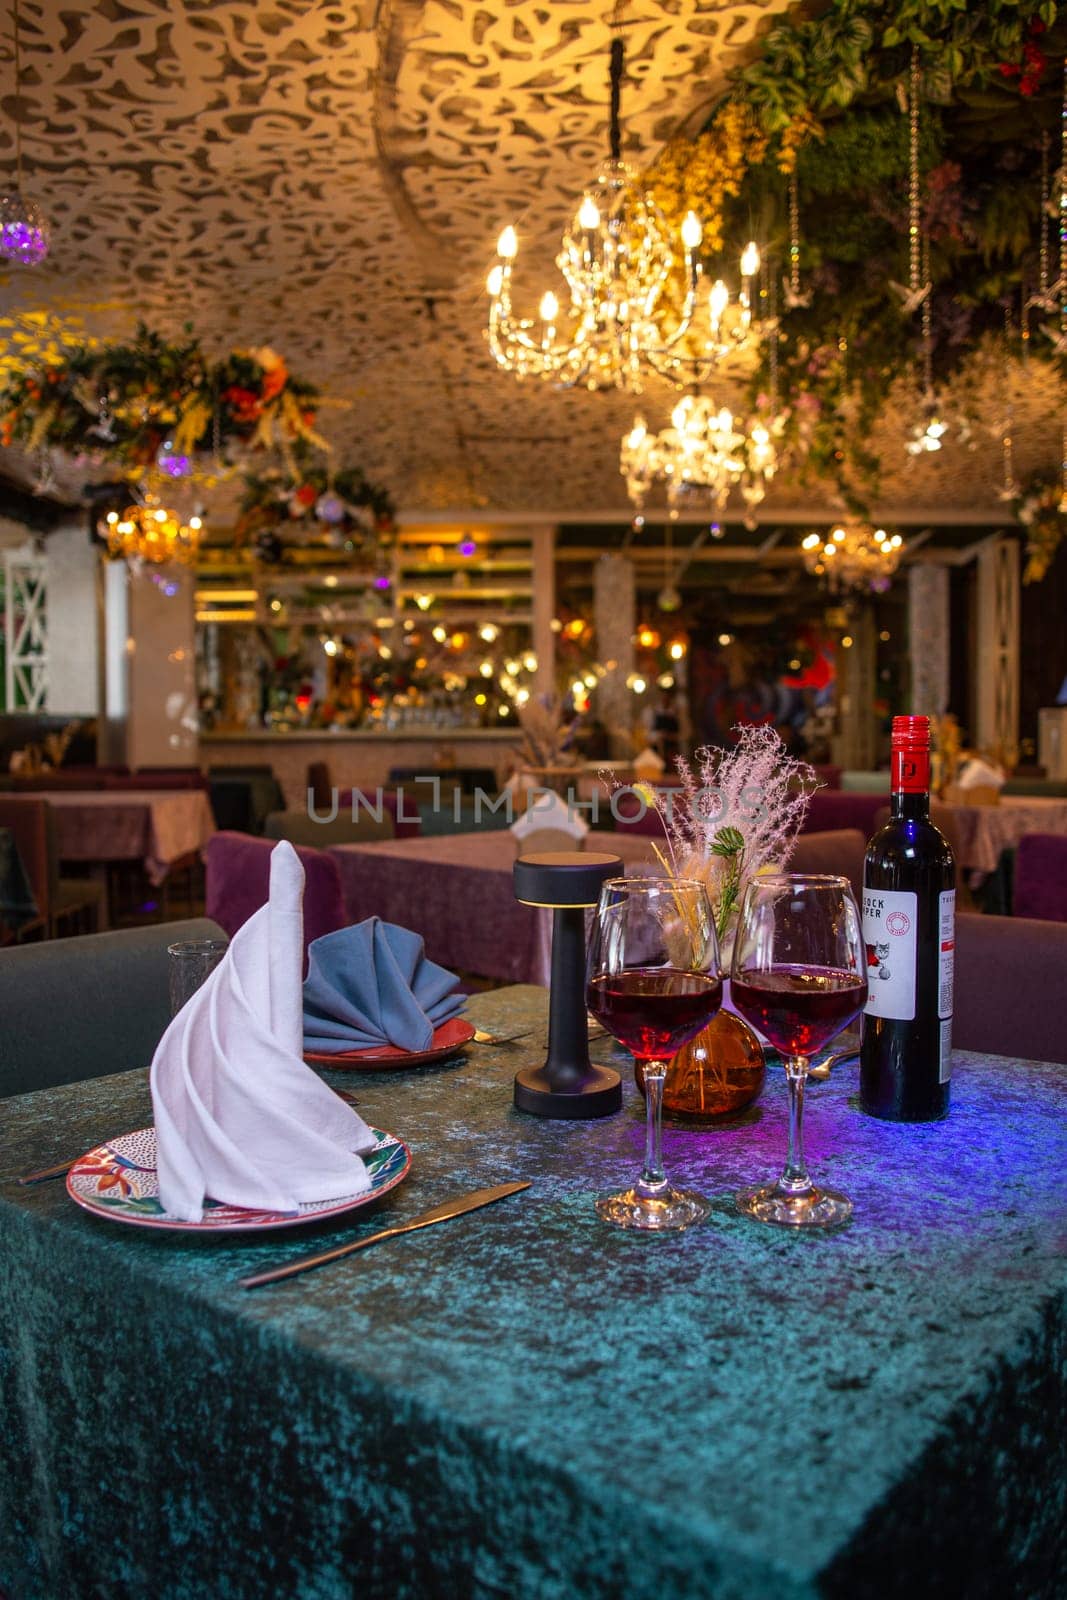 Fine Dine Restaurant Interior With Chandeliers And Table Settings by Pukhovskiy